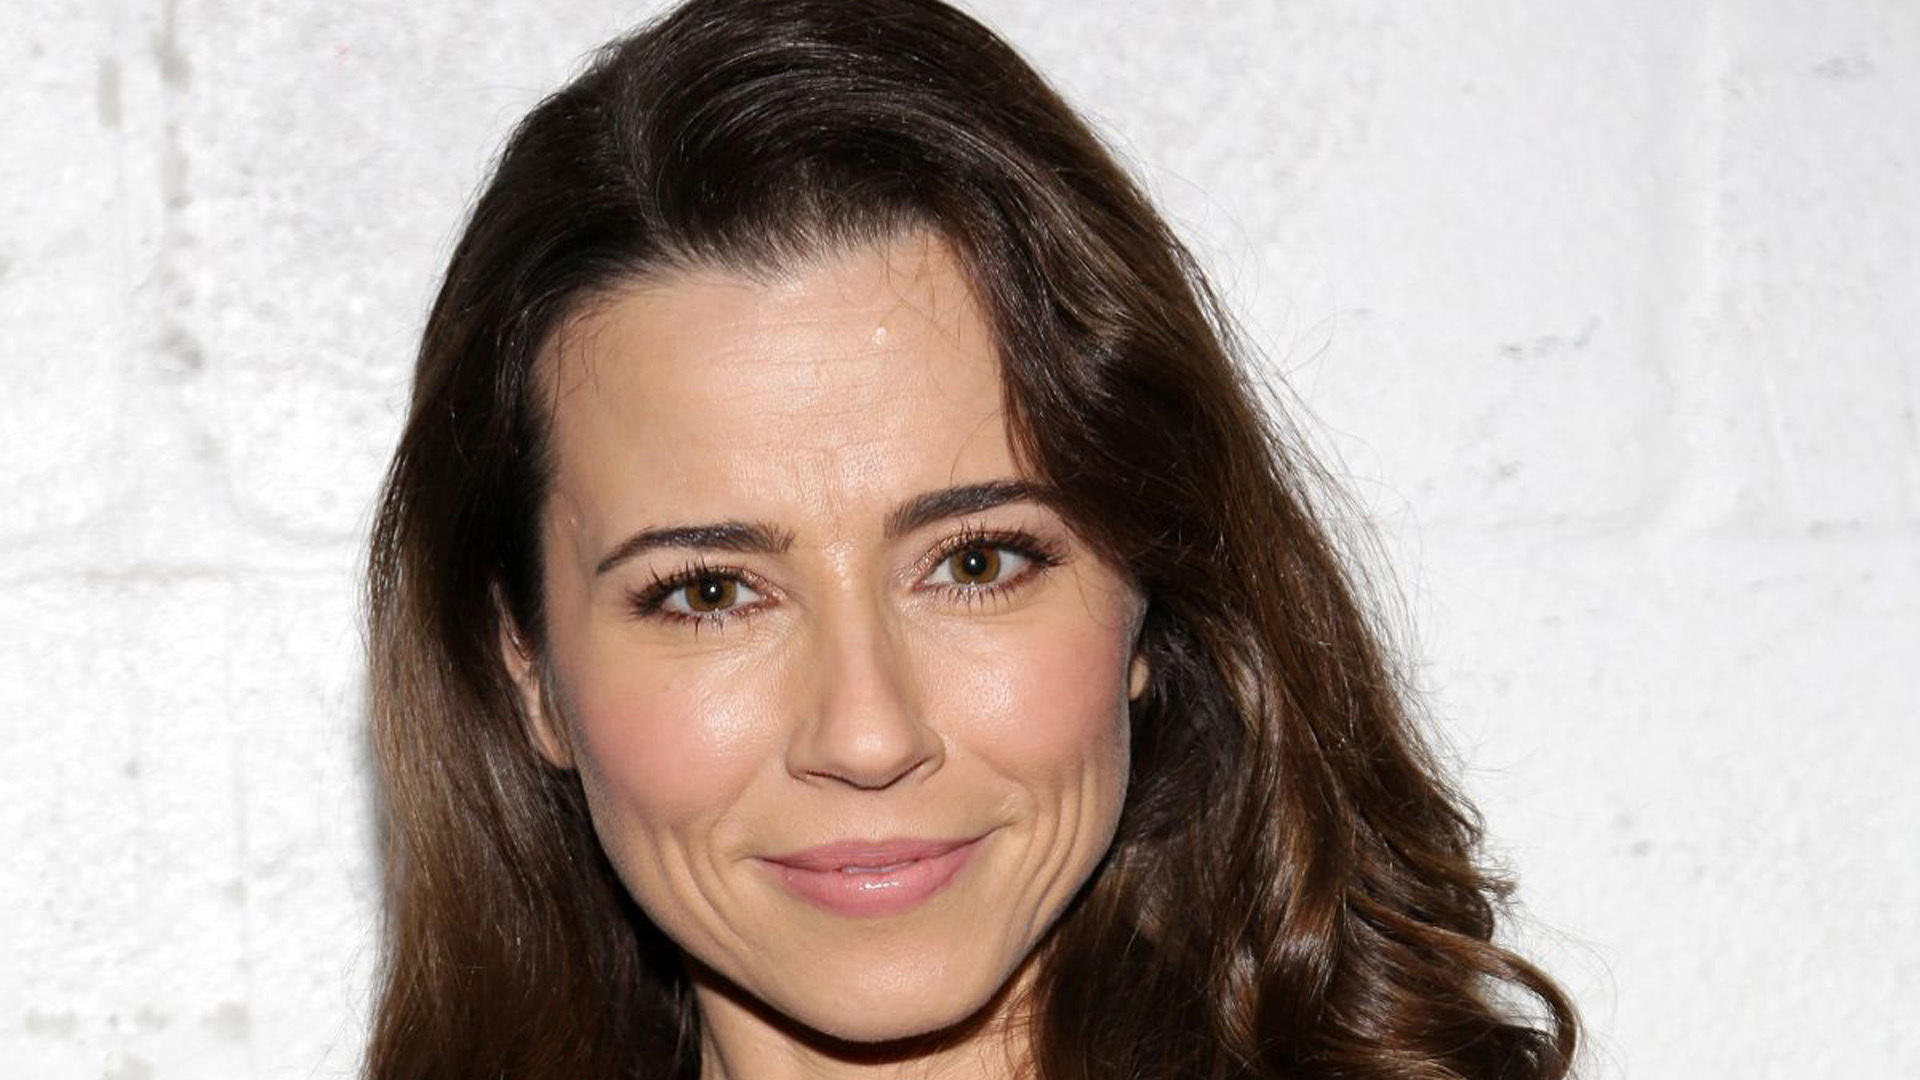 Linda Cardellini Wallpaper Image Photos Pictures Background